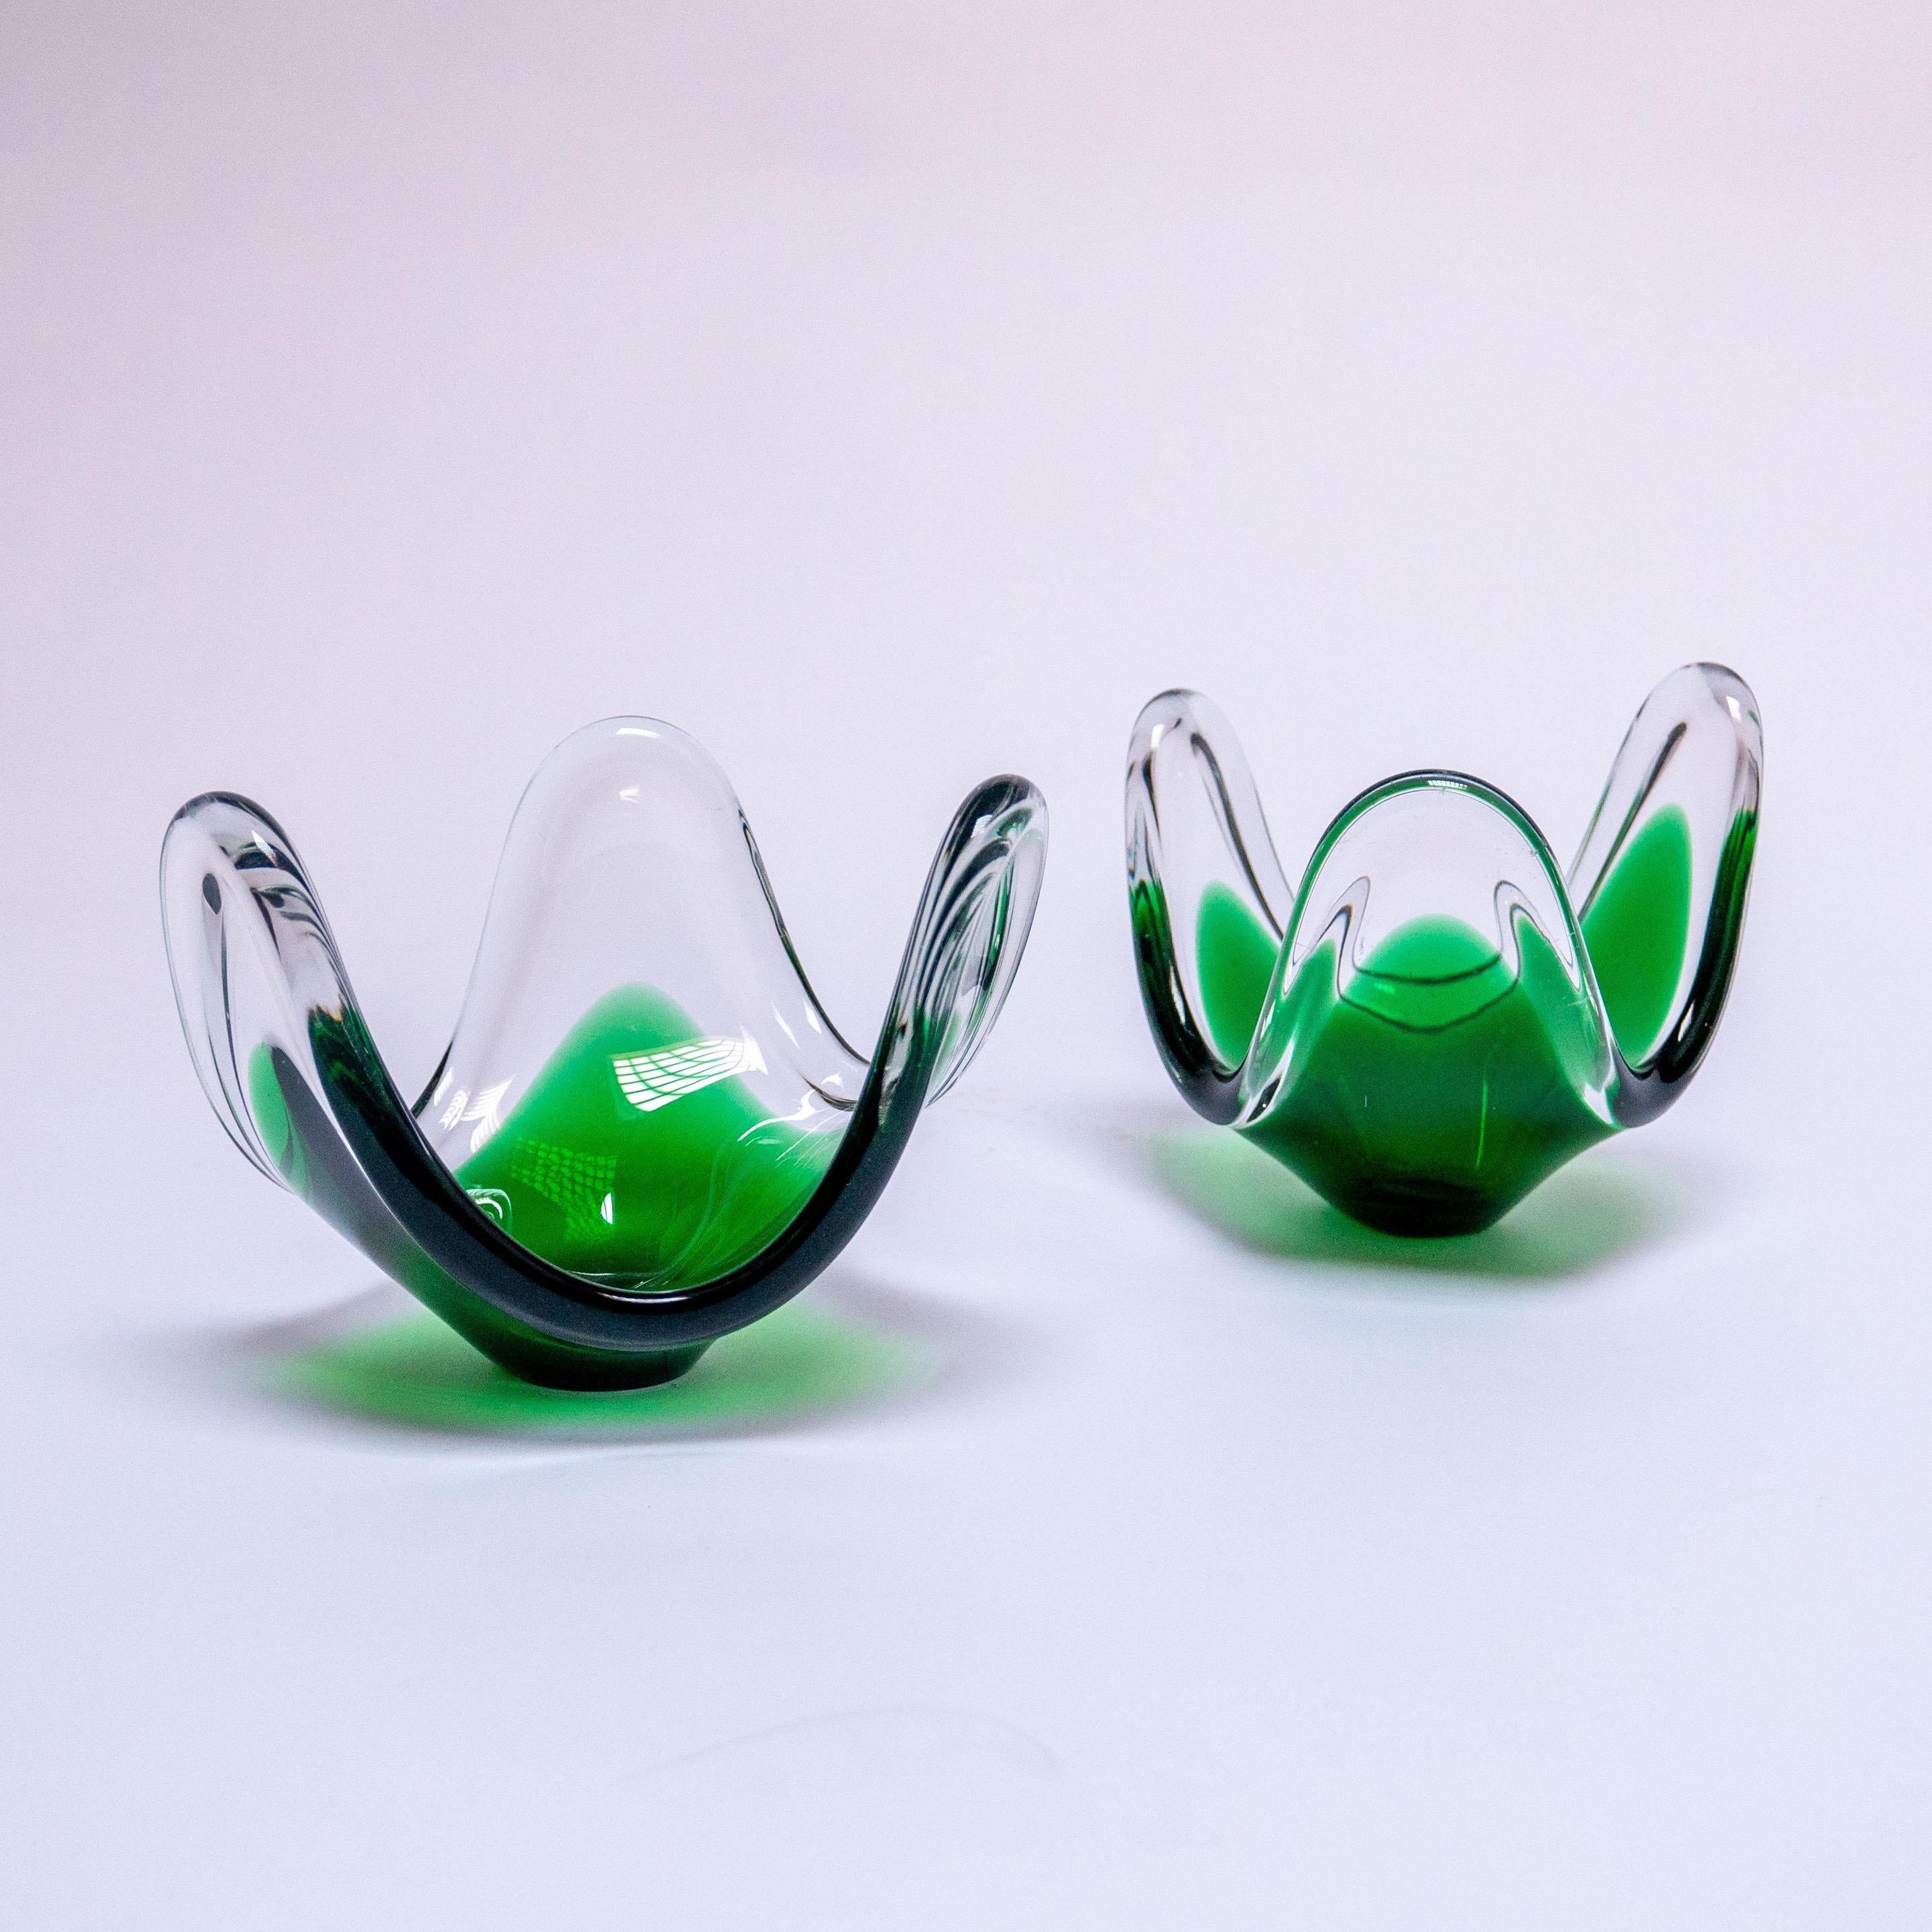 Showing all the beauty of Murano glass objects, with fluid shapes, vivid colors and a flawless, artisanal craftsmanship behind, these two sculptures give you endless decoration possibilities. They work great in a pair, have a personality big enough